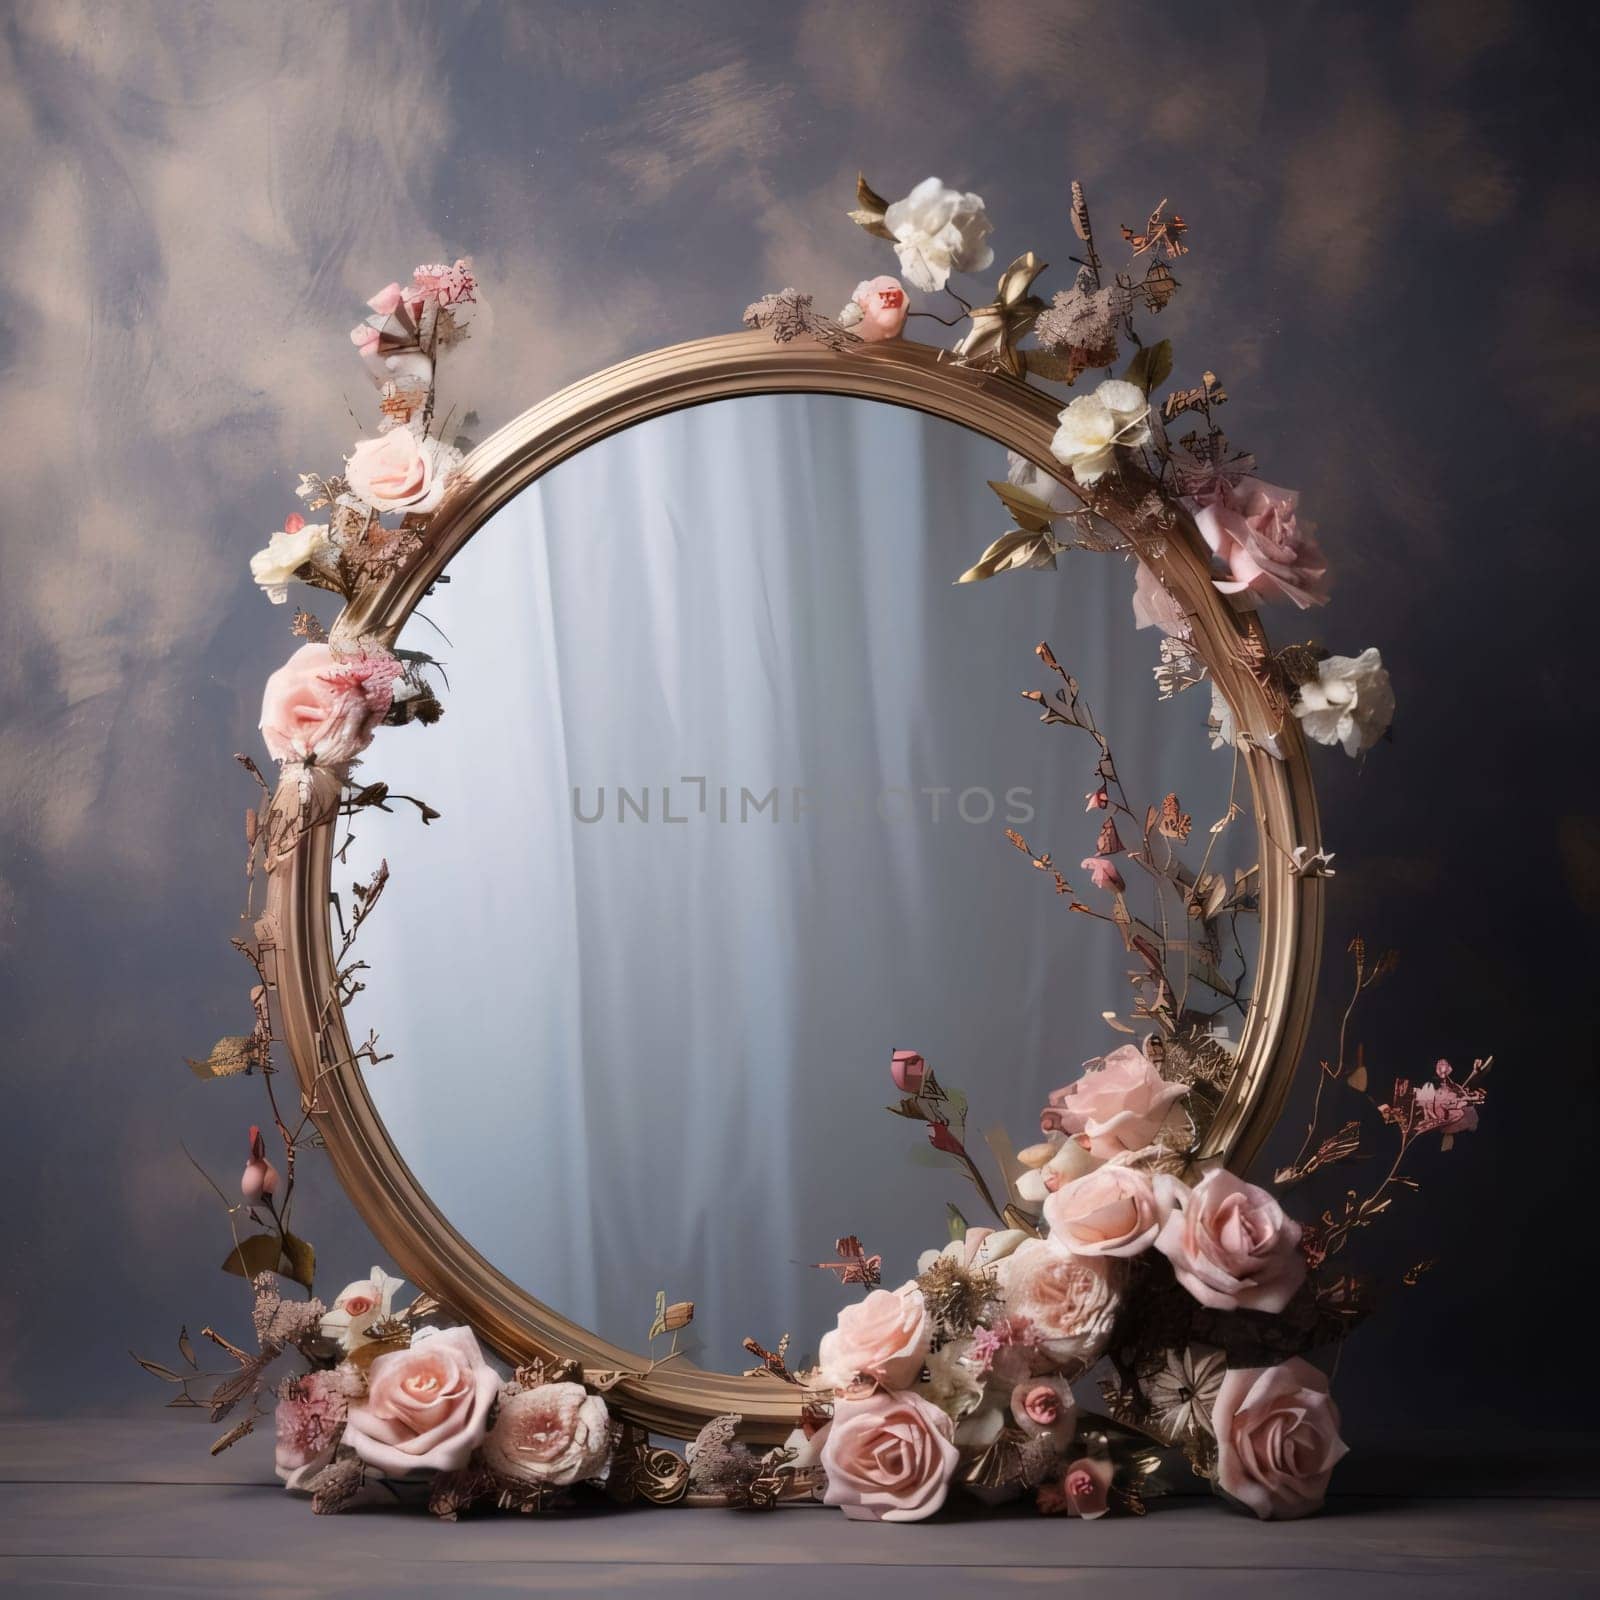 Mirror decorated with pink roses, flowers, dark background. Flowering flowers, a symbol of spring, new life. A joyful time of nature waking up to life.